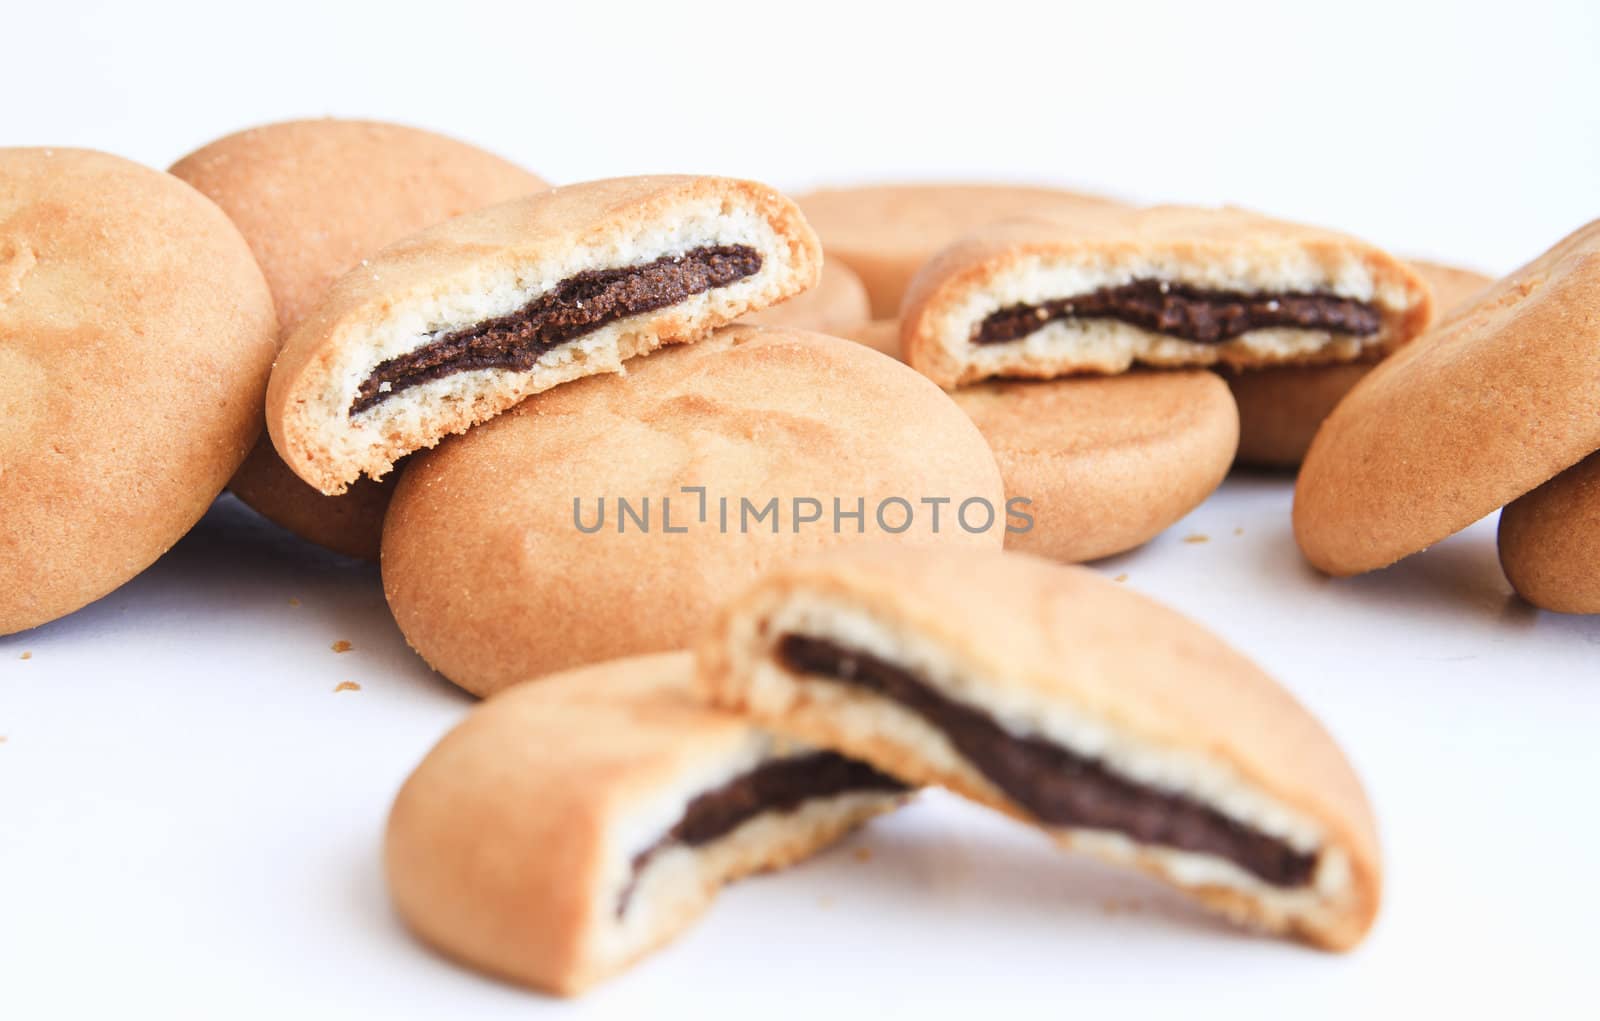 biscuits filled with chocolate  by manaemedia